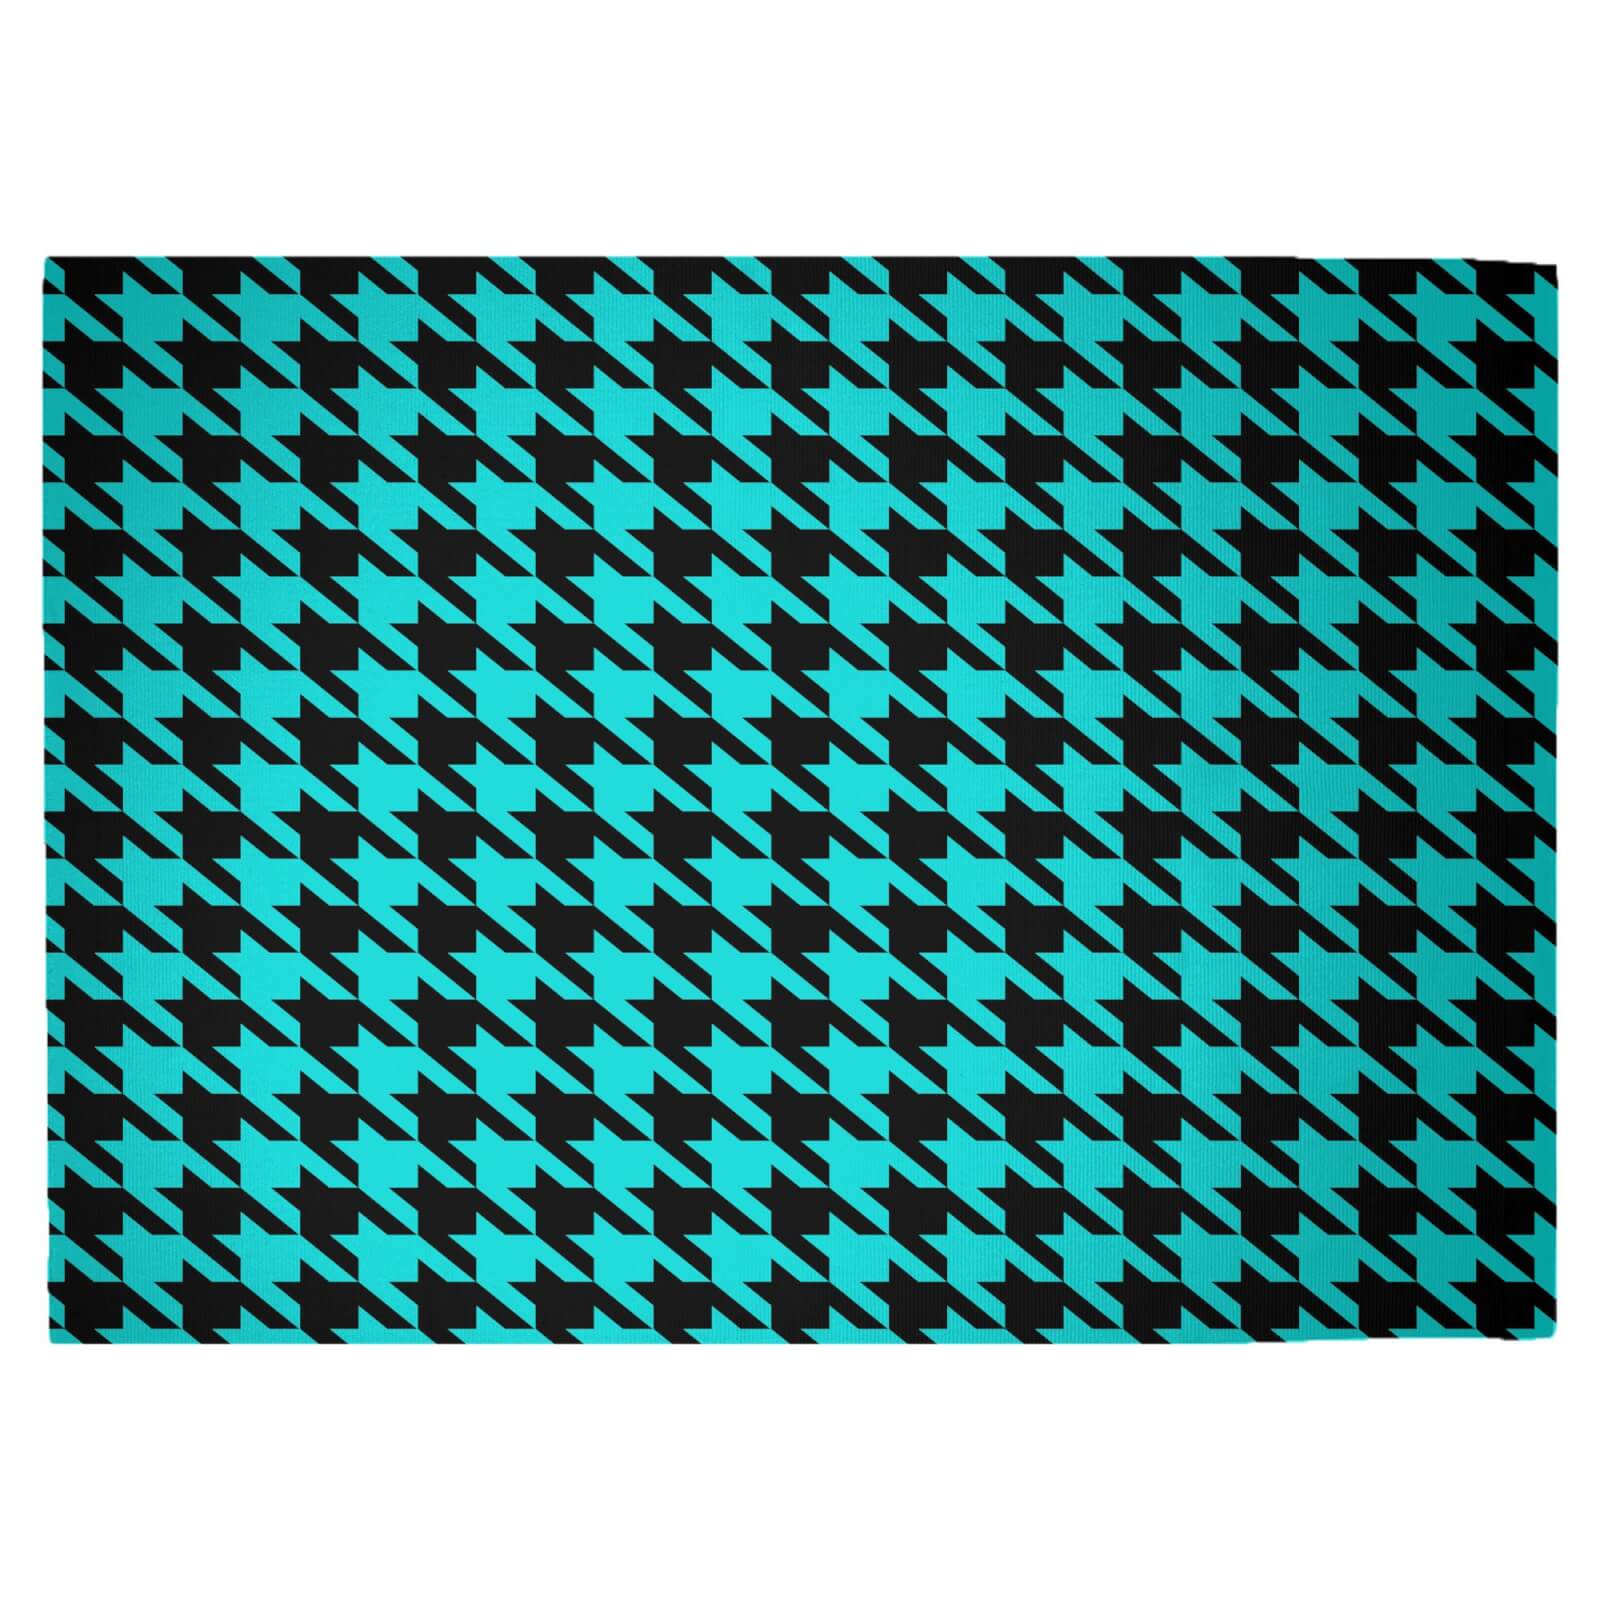 Turquoise Dogtooth Woven Rug - Large